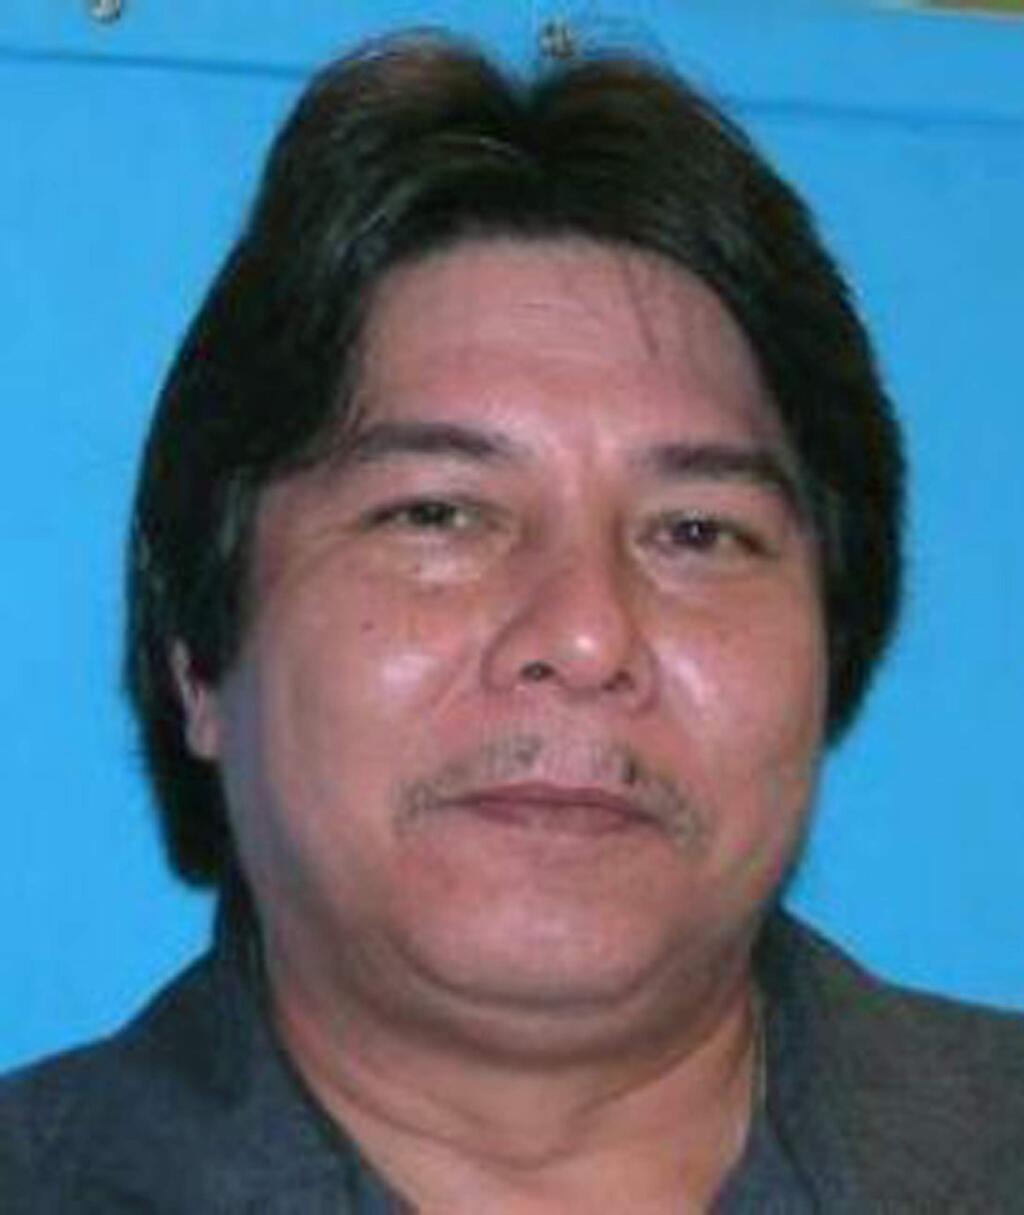 FILE - This undated file photo provided by the Maui Police Department shows Randall Toshio Saito. Saito, acquitted of a 1979 murder by reason of insanity who escaped from a Hawaii psychiatric hospital over the weekend, was arrested in California on Wednesday, Nov. 15, 2017. (Maui Police Department via AP, File)